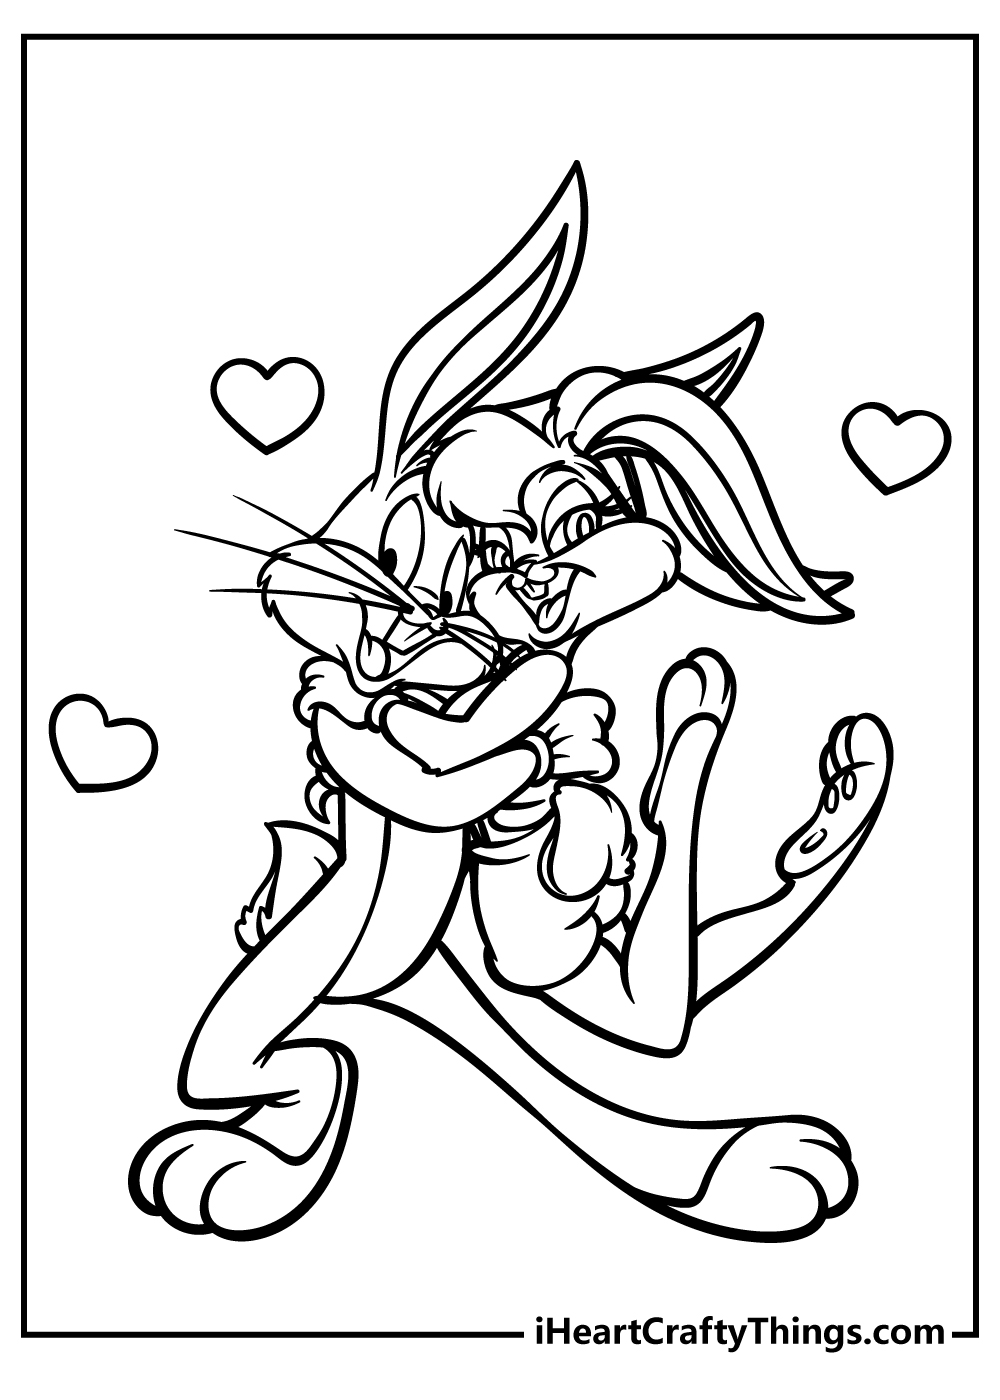 Looney tunes coloring pages free printables